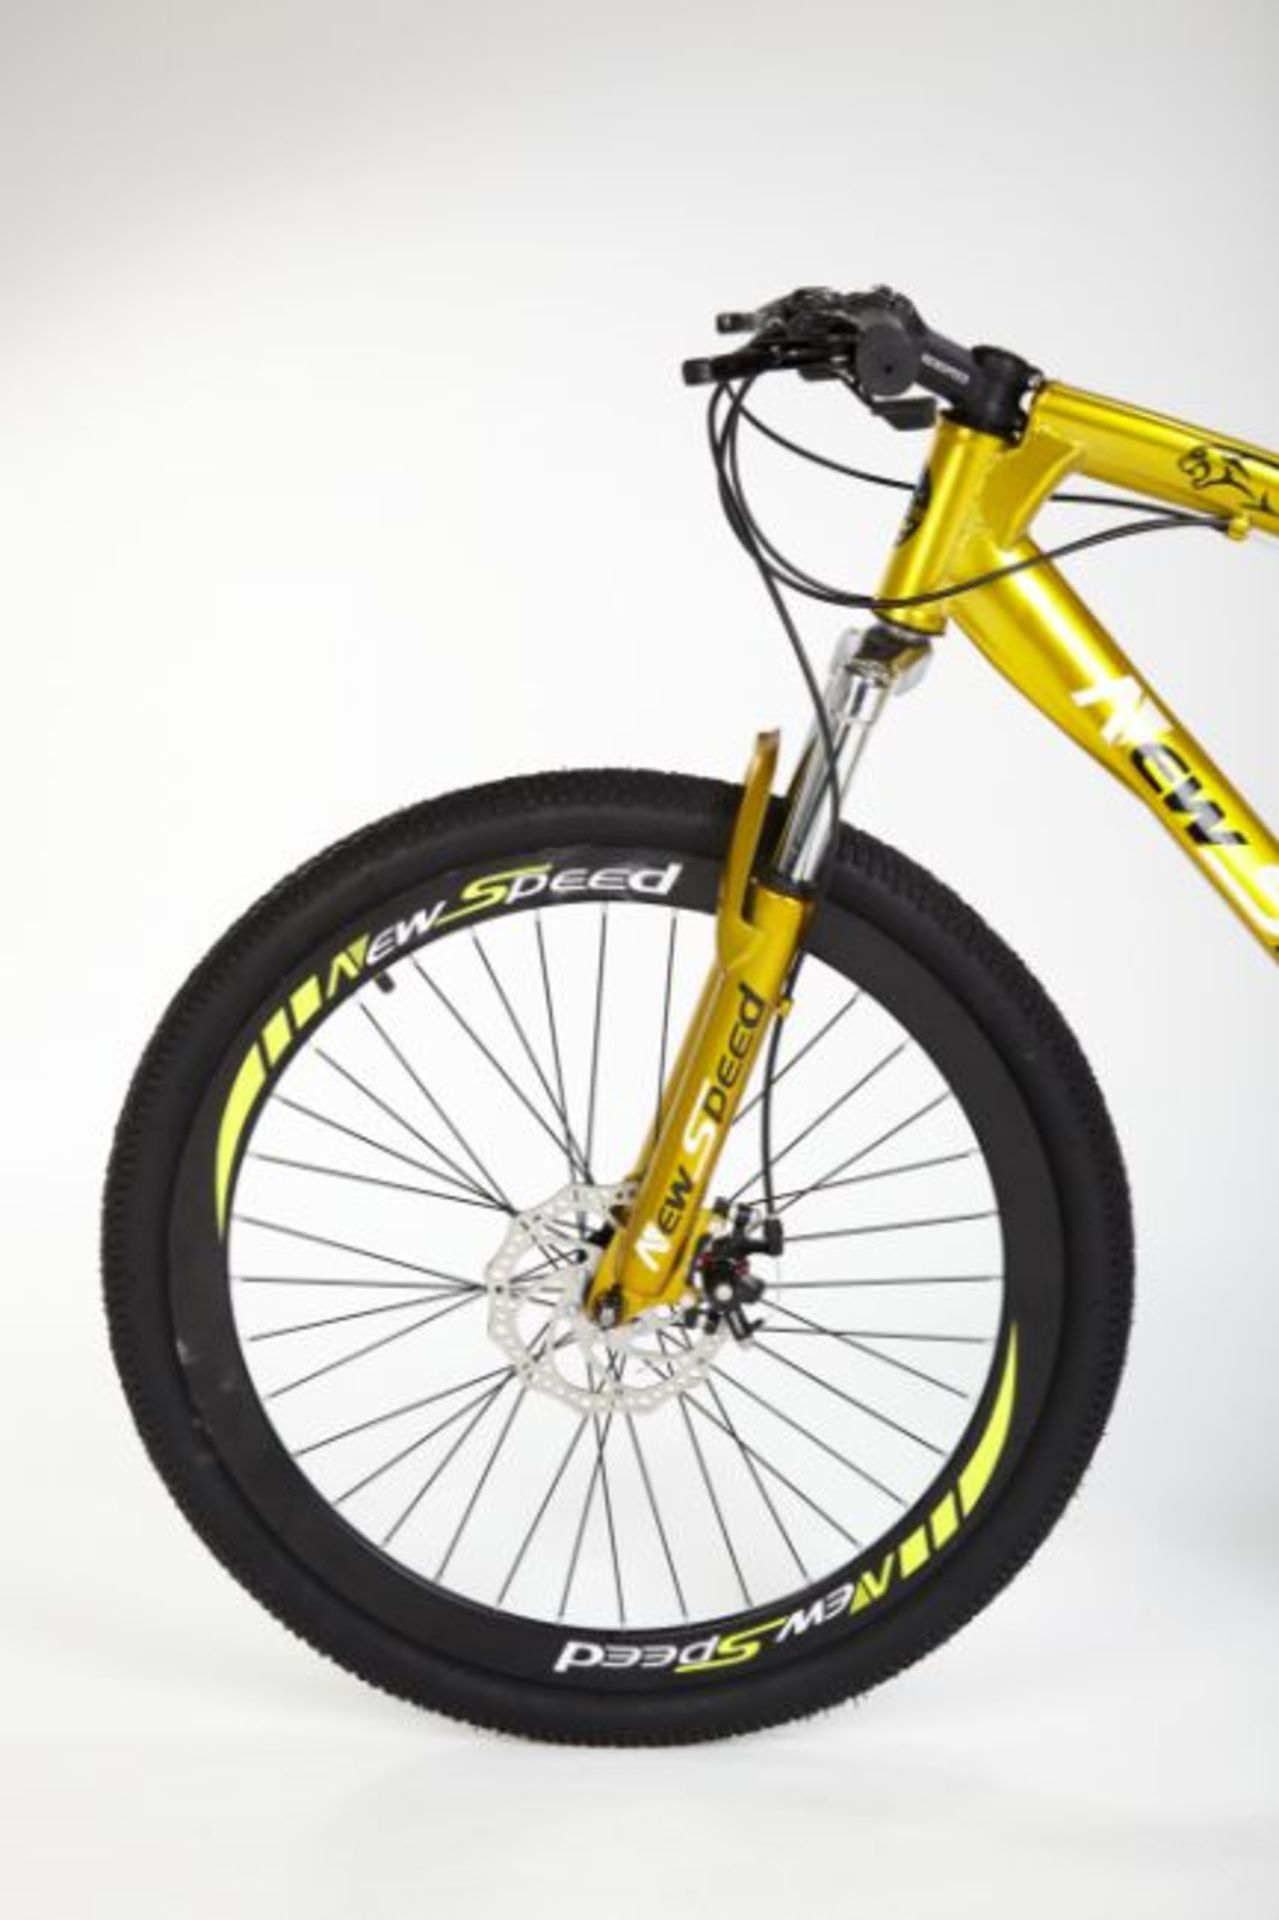 5 X BRAND NEW NEW SPEED 21 GEARS STUNNING SUSPENSION GOLD COLOURED MOUNTAIN BIKE - Image 5 of 11